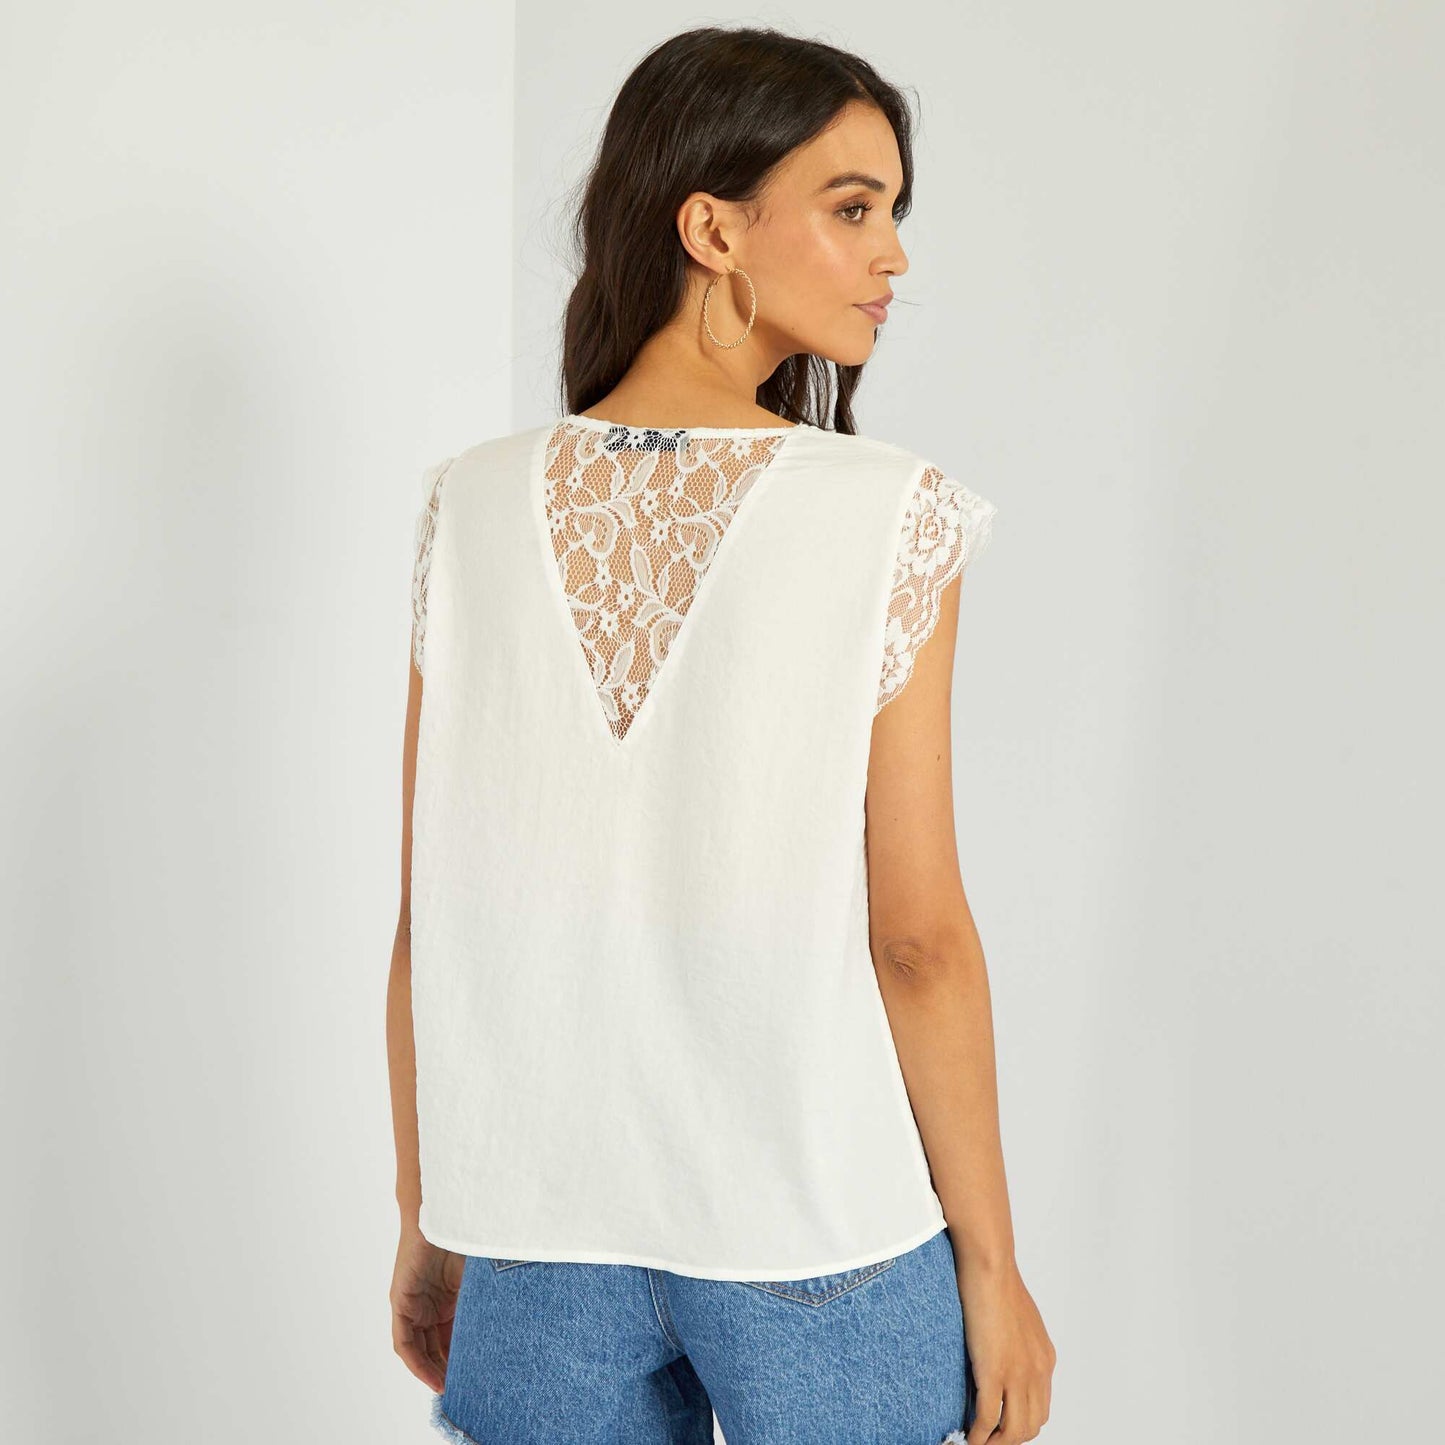 Satin blouse with lace White